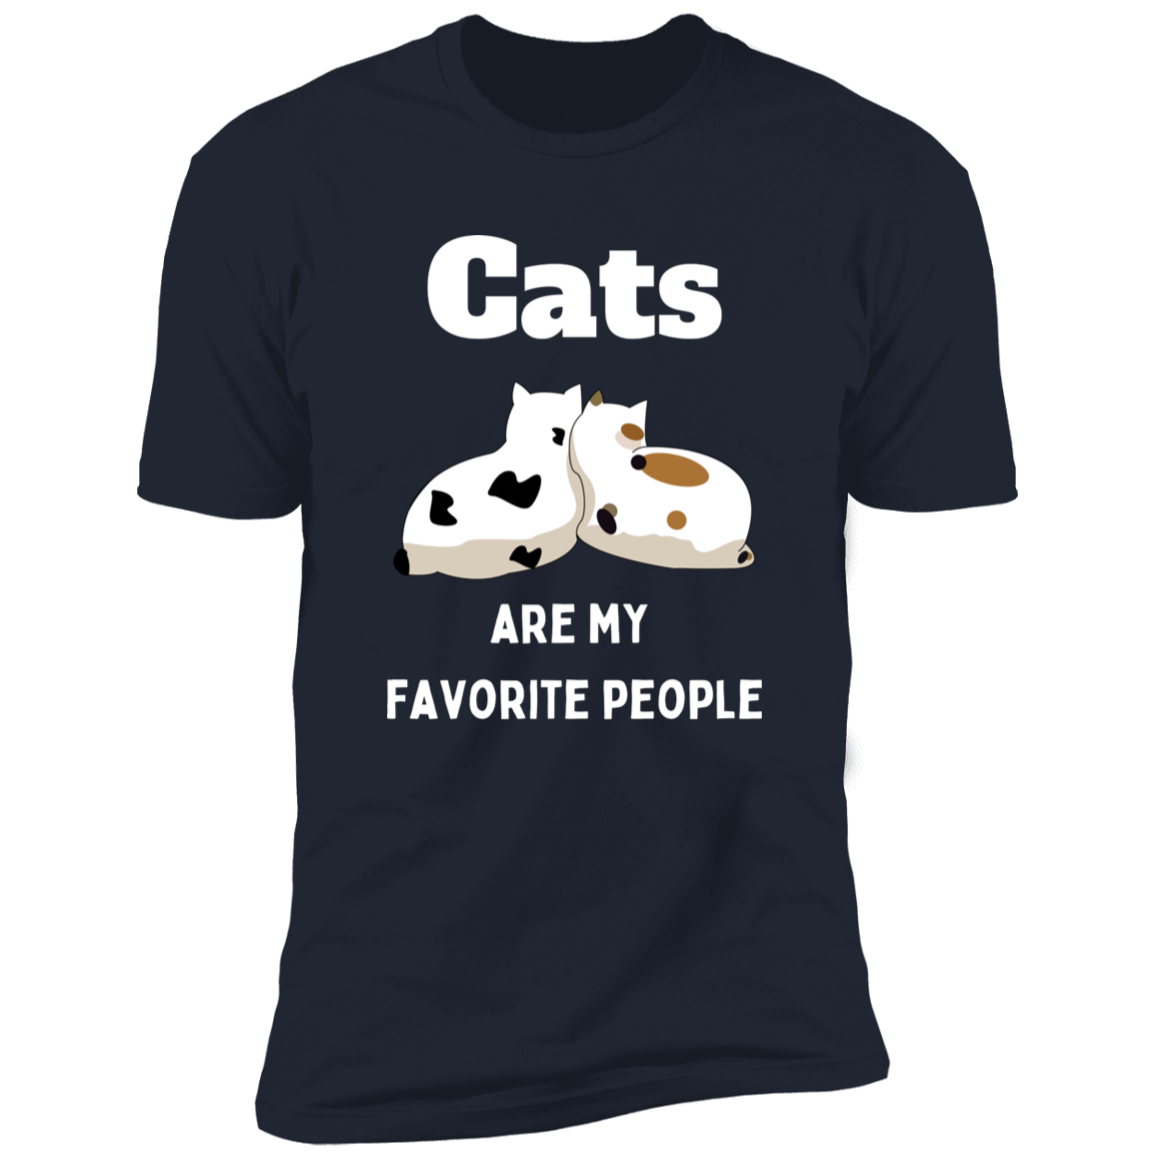 Cats Are My Favorite People T-shirt, Cat Shirt for humans, in navy blue